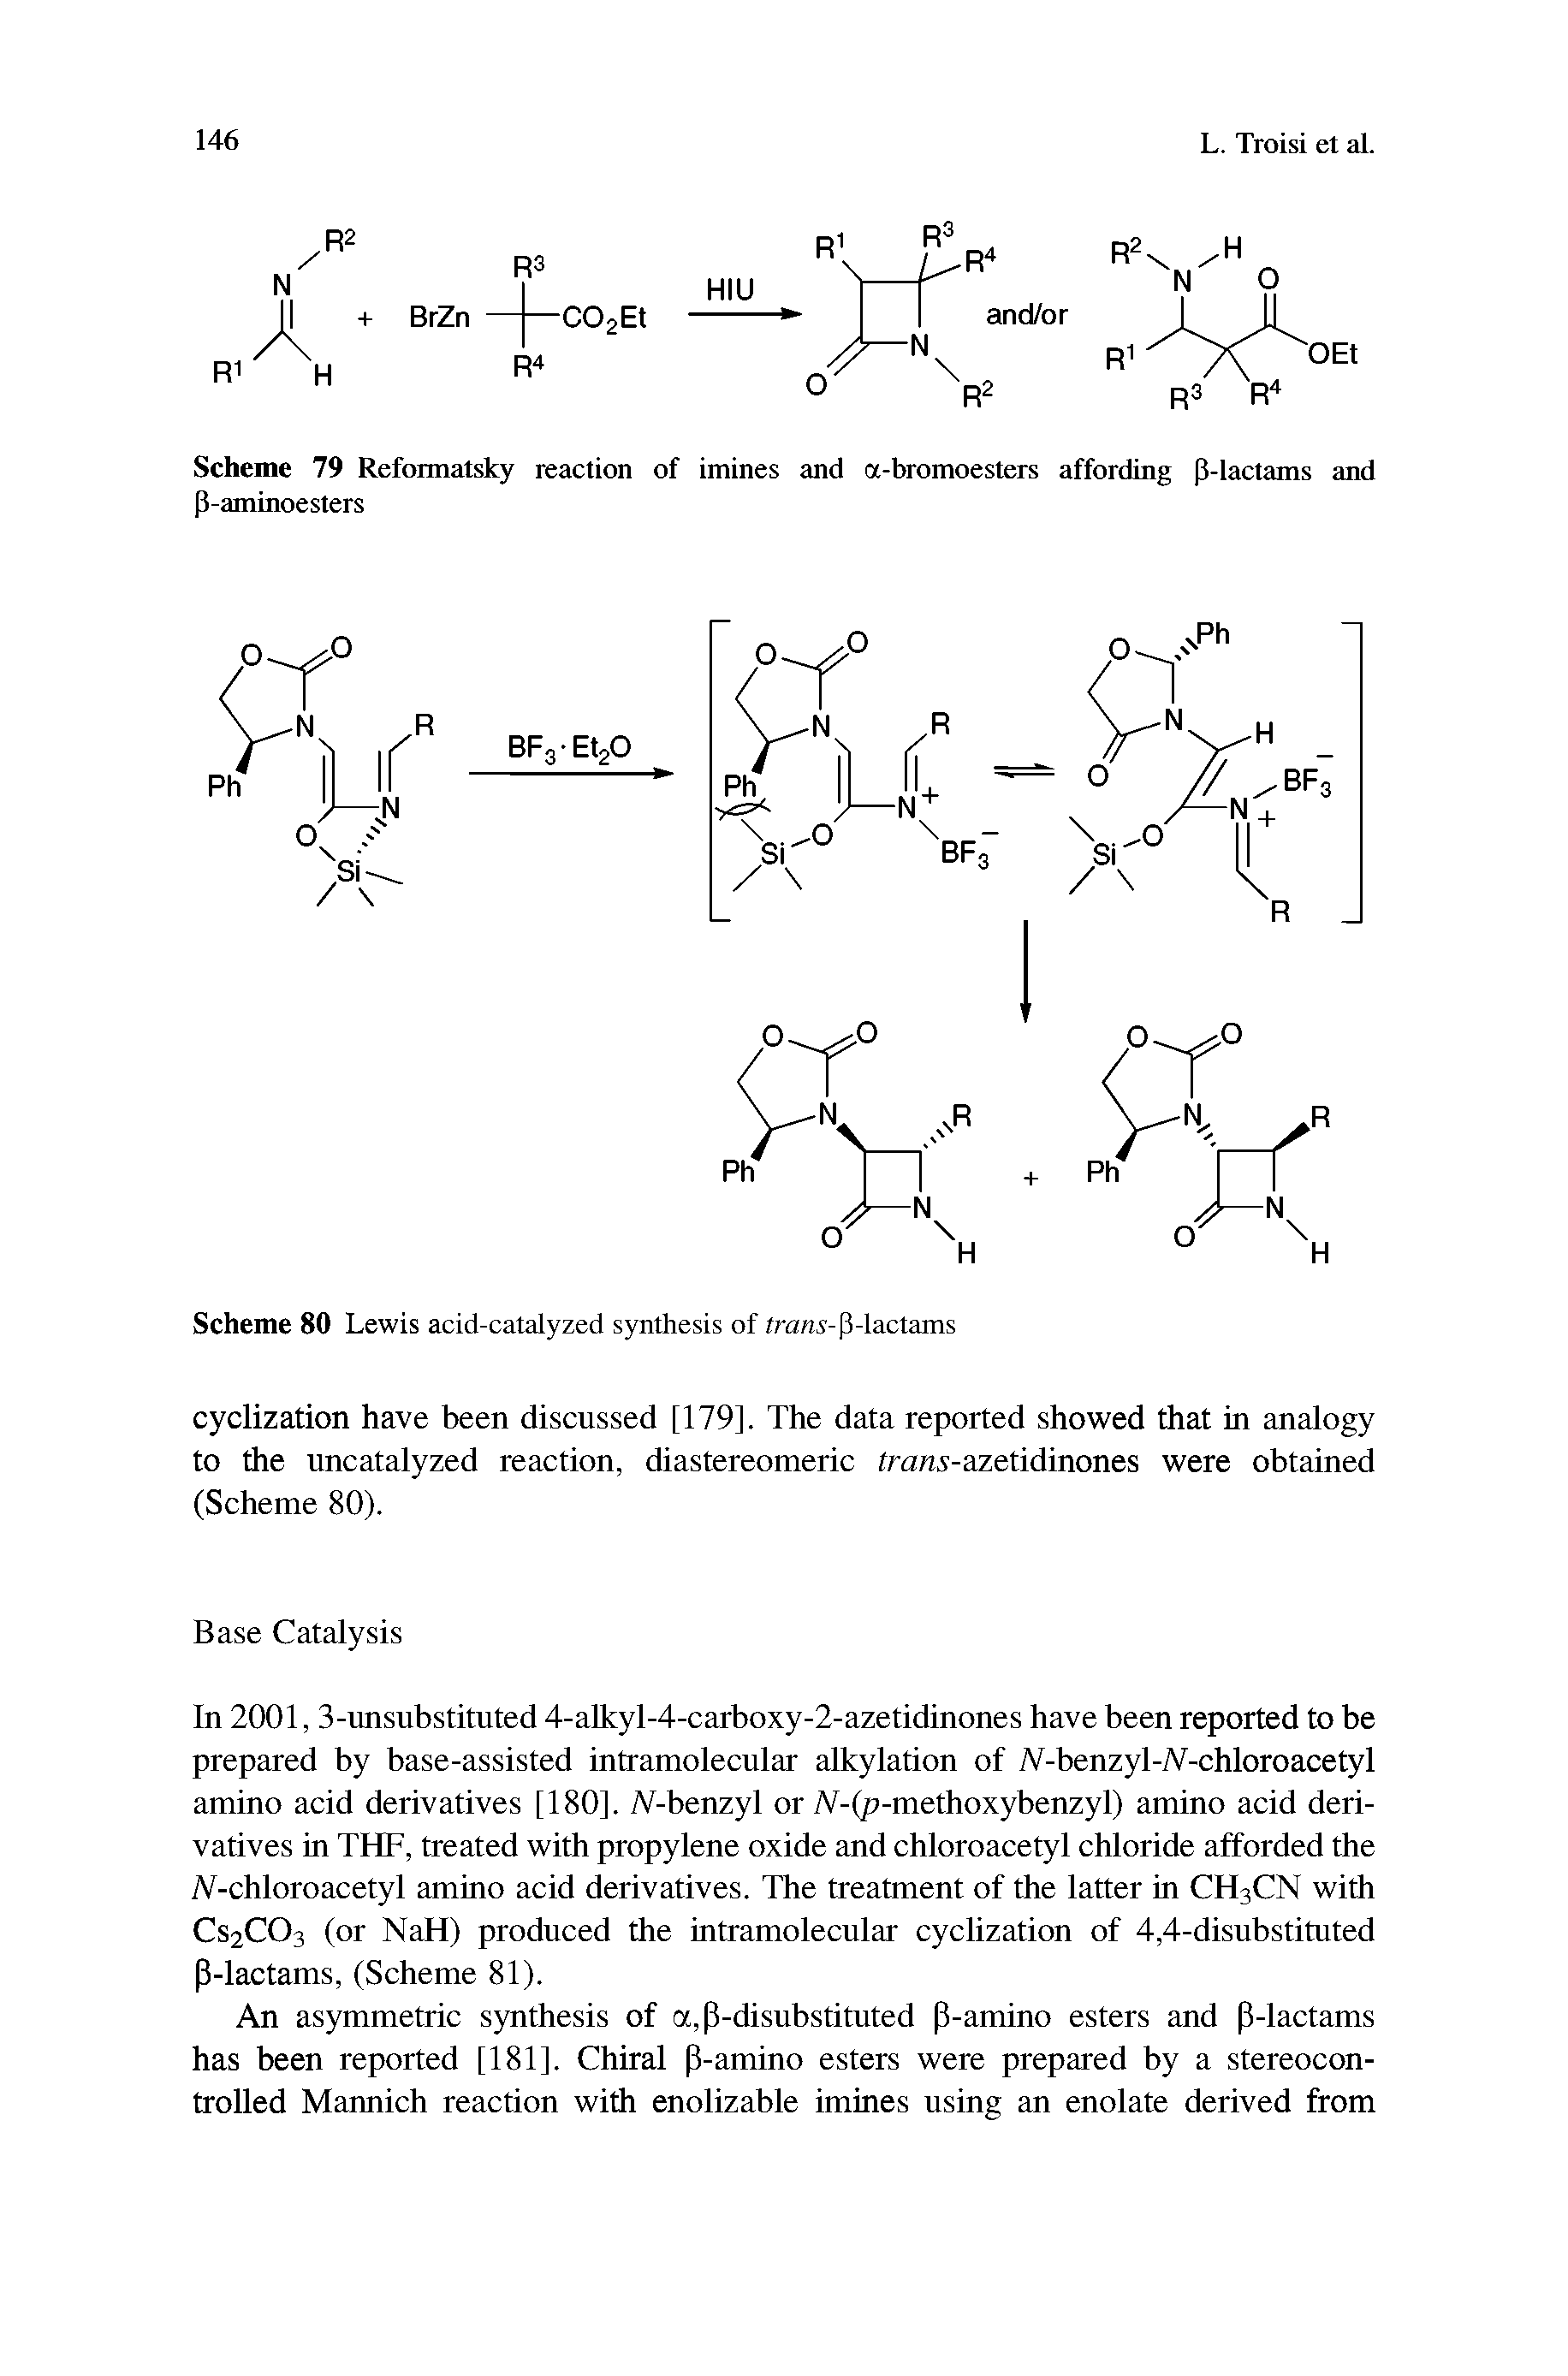 Scheme 79 Refoimatsky reaction of imines and a-bromoesters affording P-lactams and P-aminoesters...